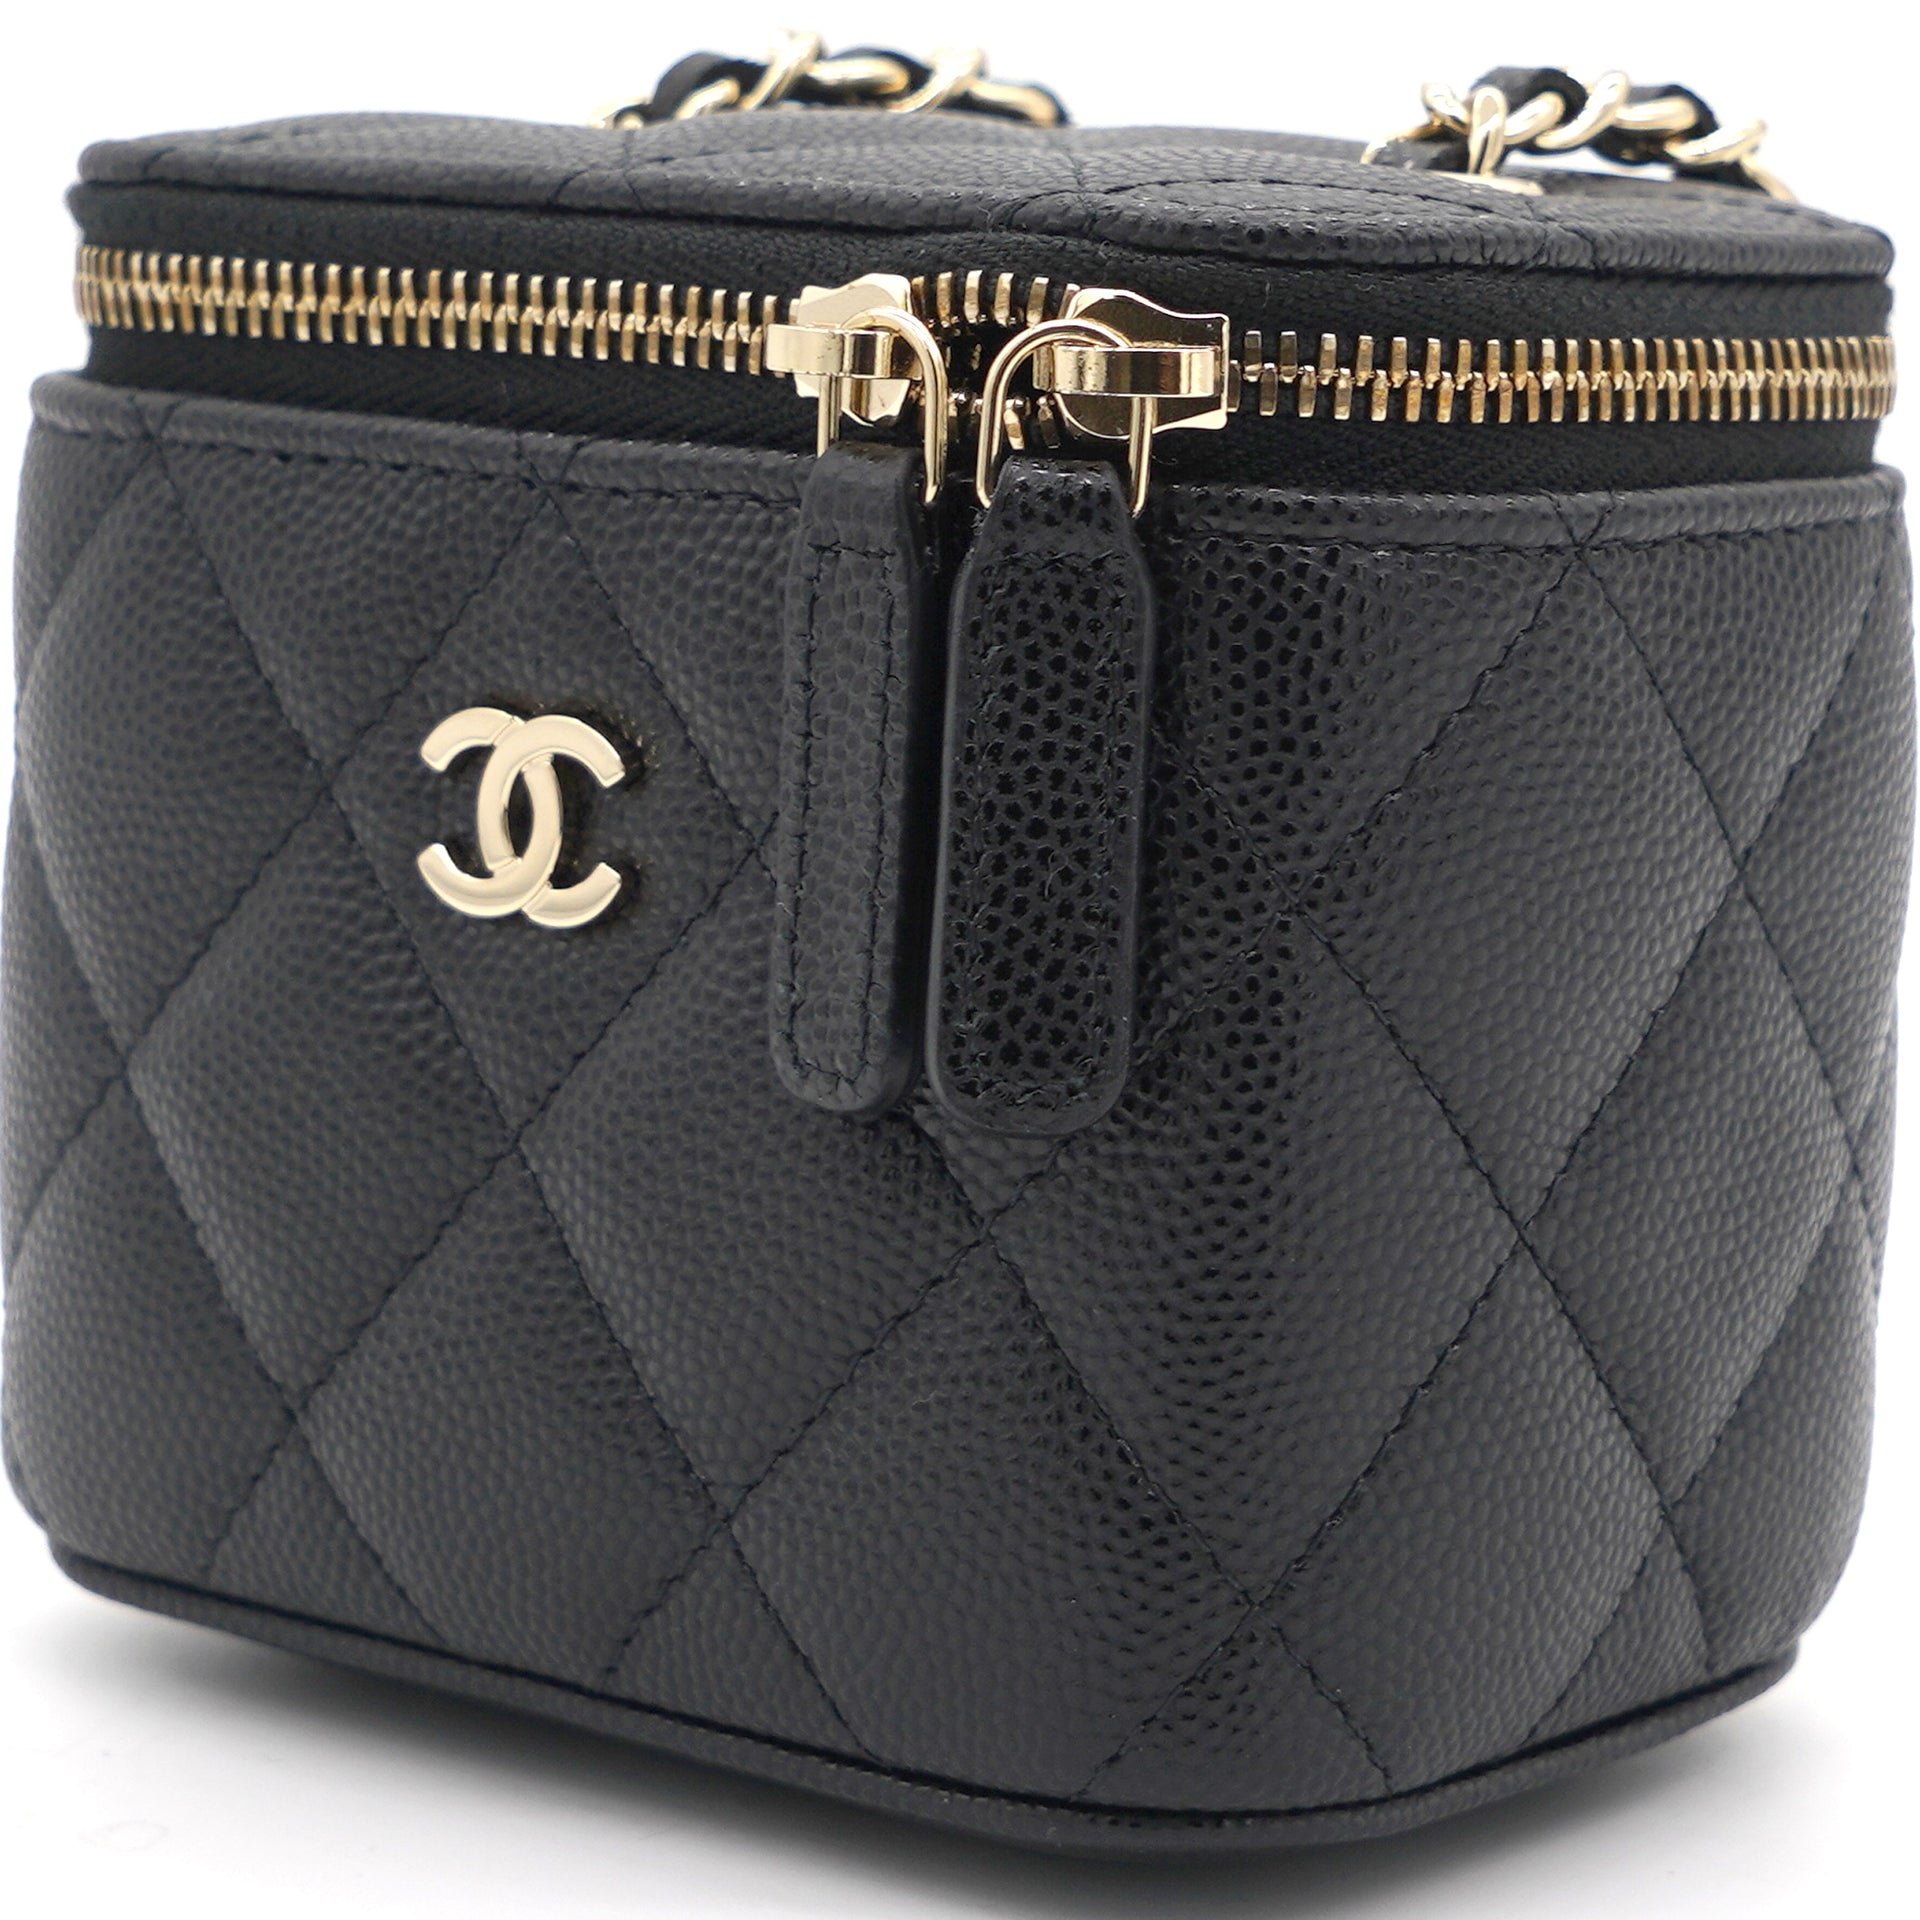 Chanel Chanel Vanity Case 17 Fixed Size buy in United States with